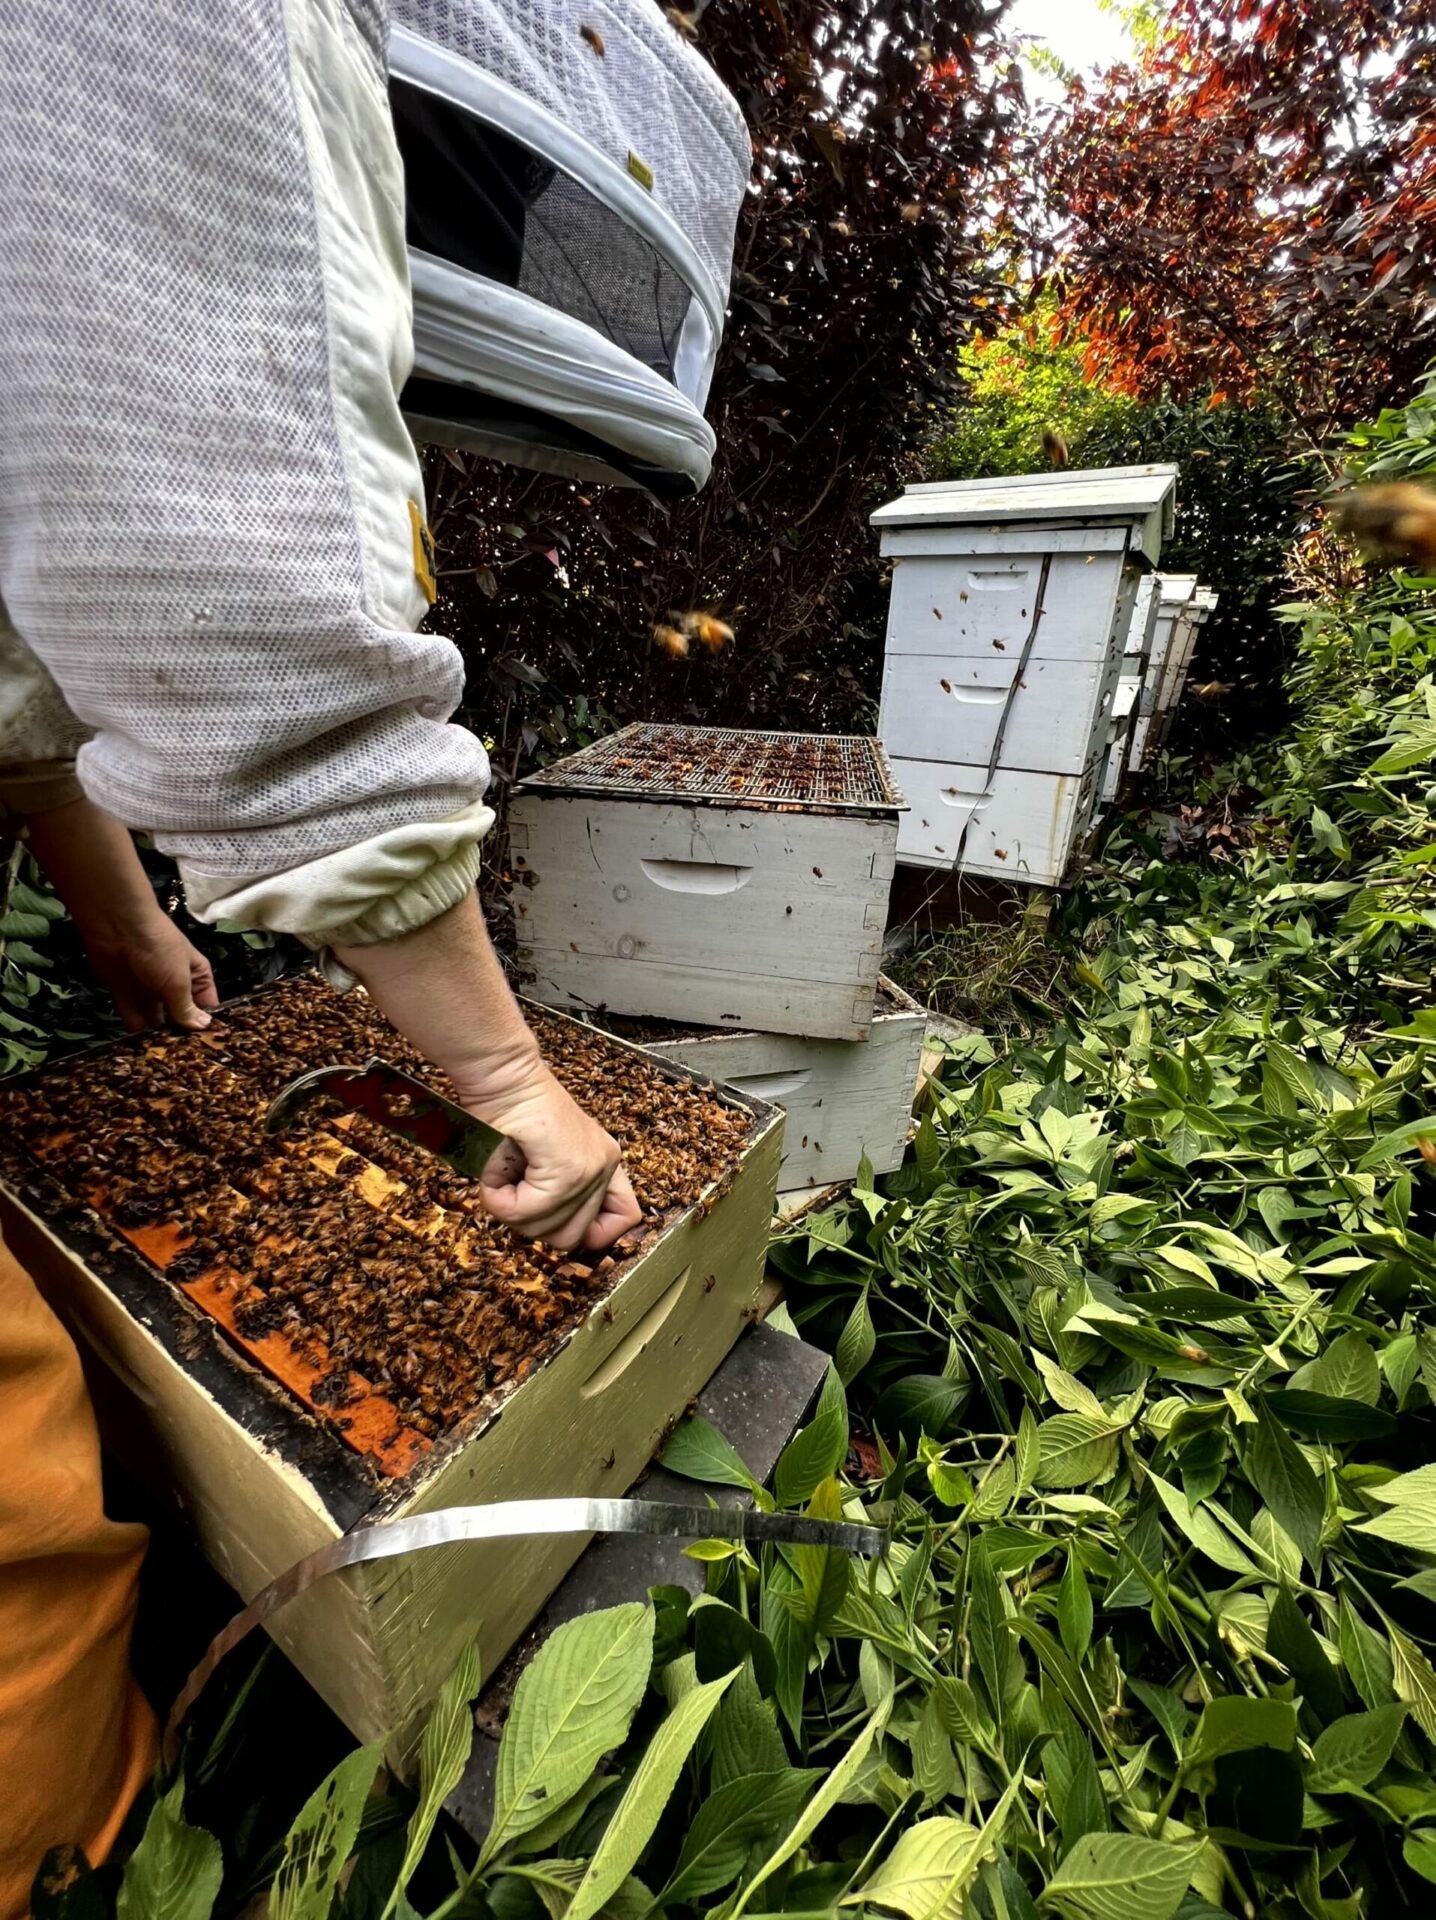 Urban beehives being inspected in Sydney